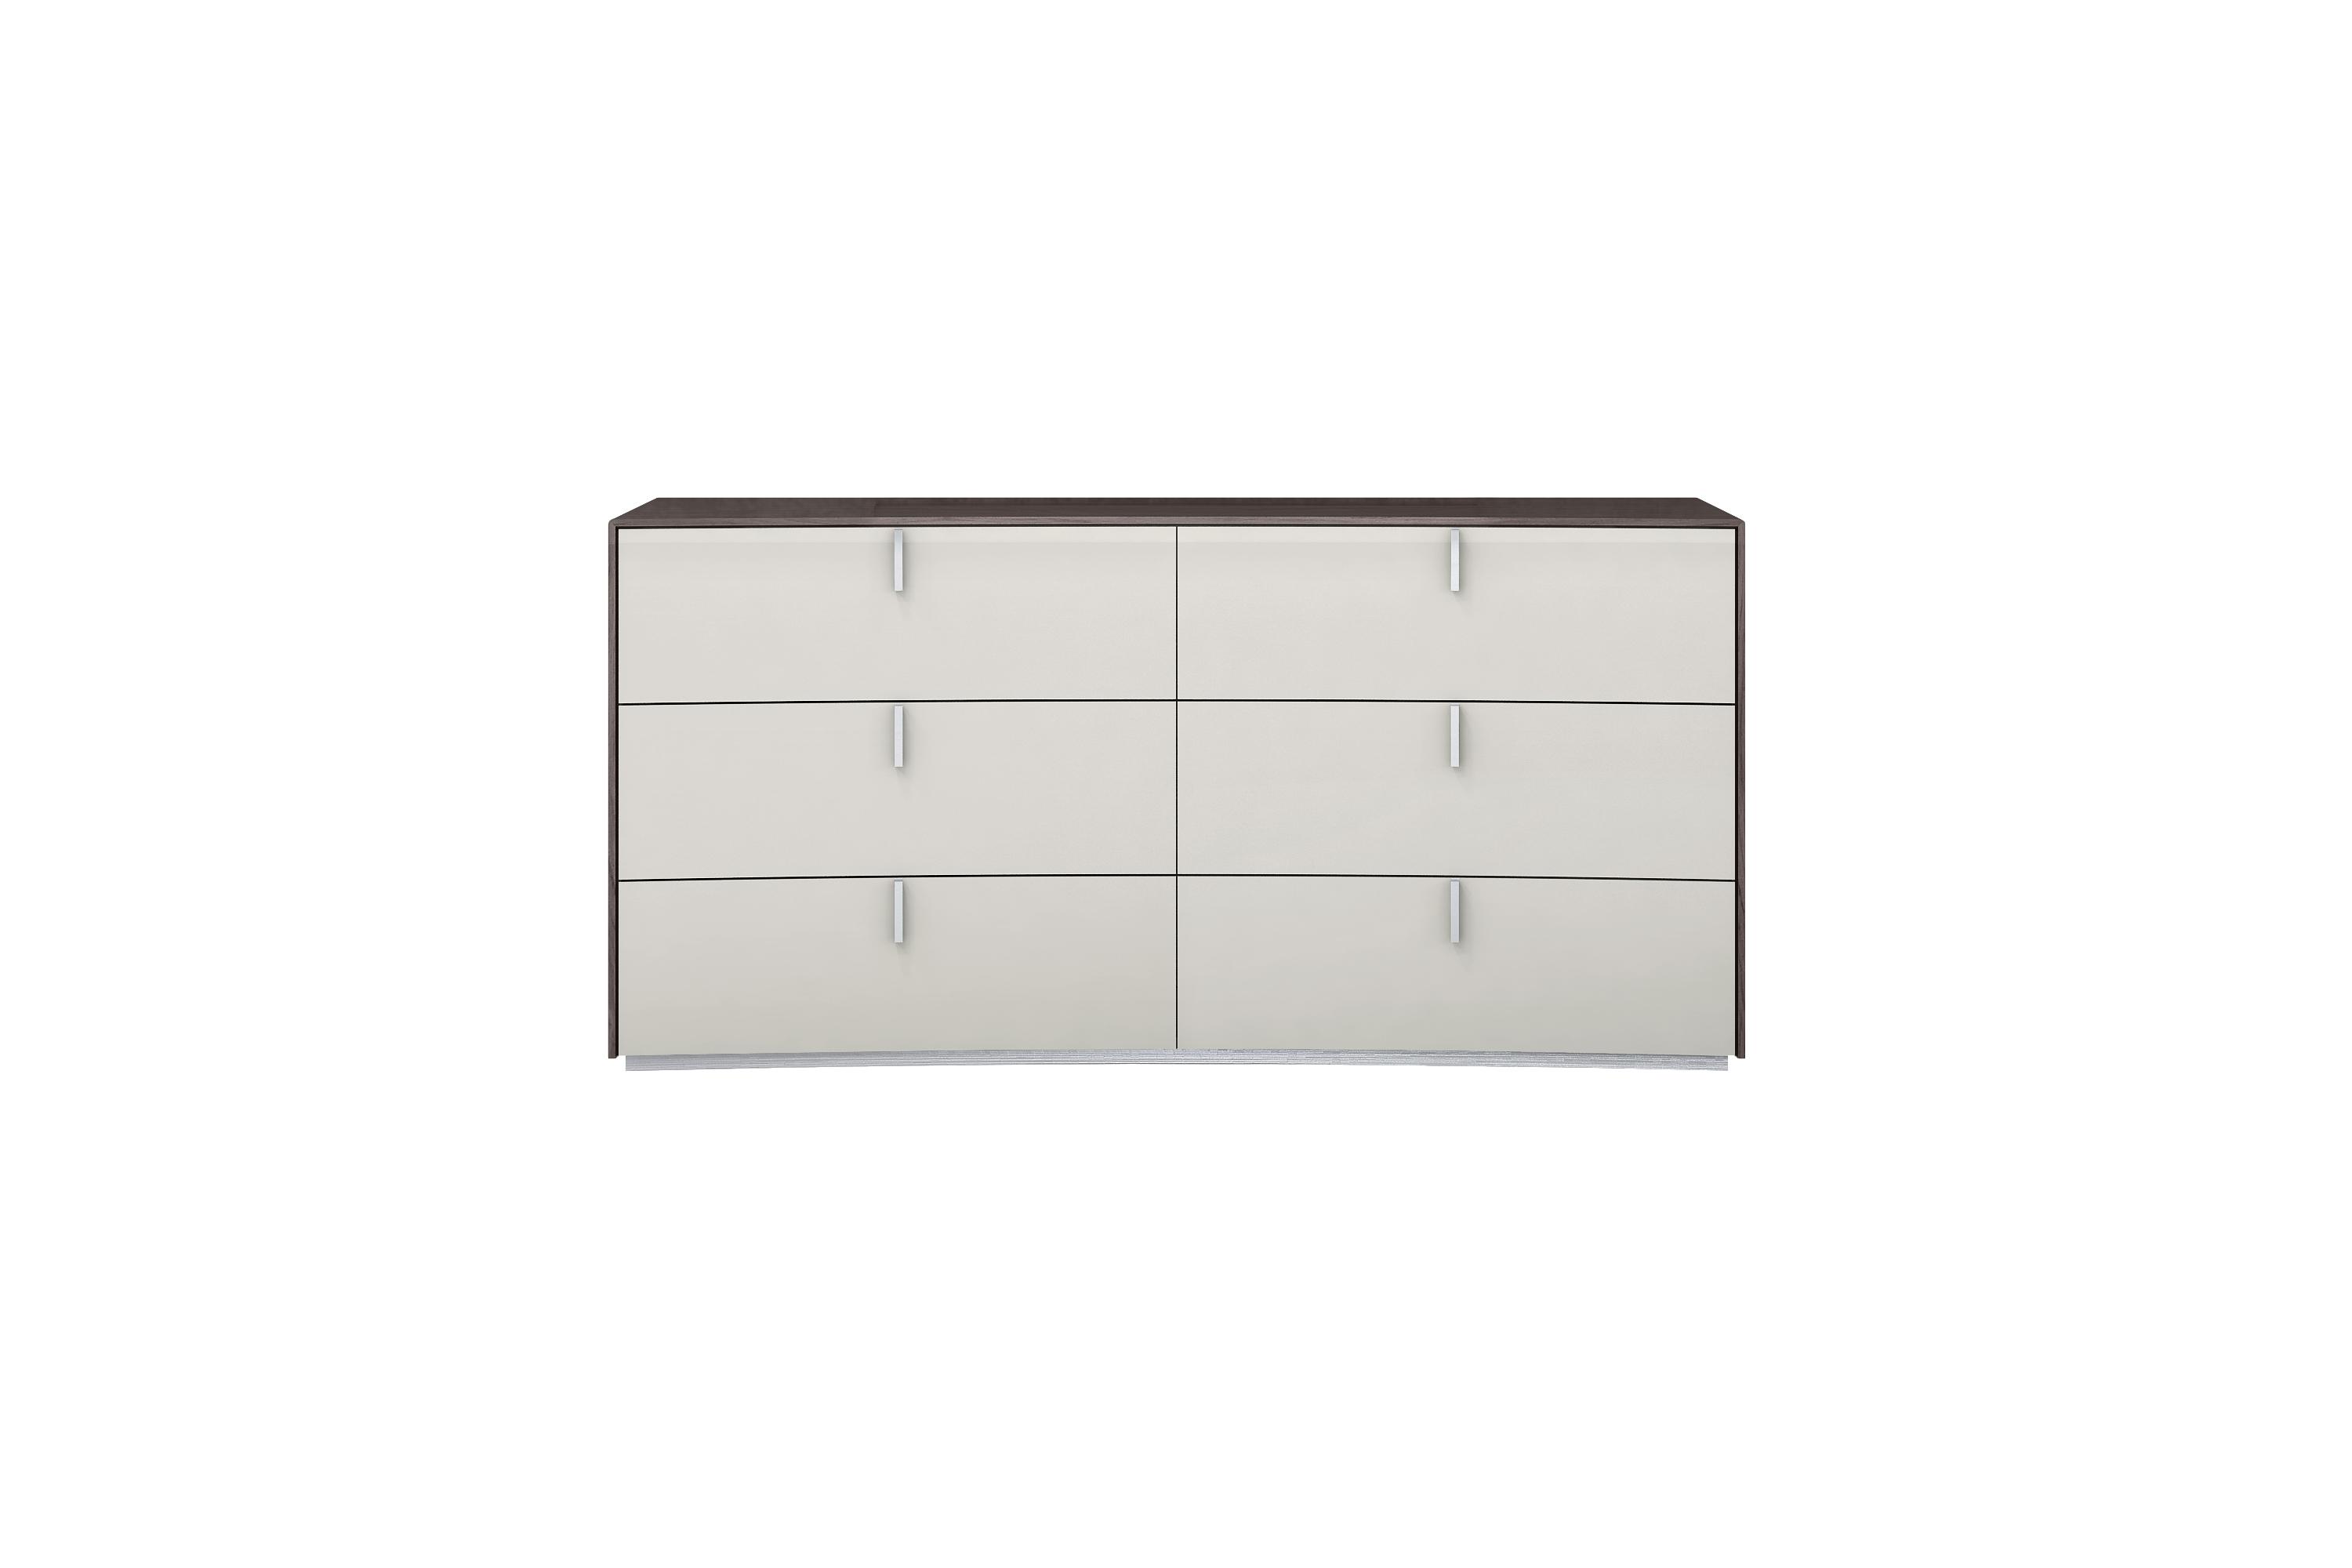 

    
Contemporary Chestnut Finish Solid Wood Dresser DR1754-GRY/LGRY Berlin
